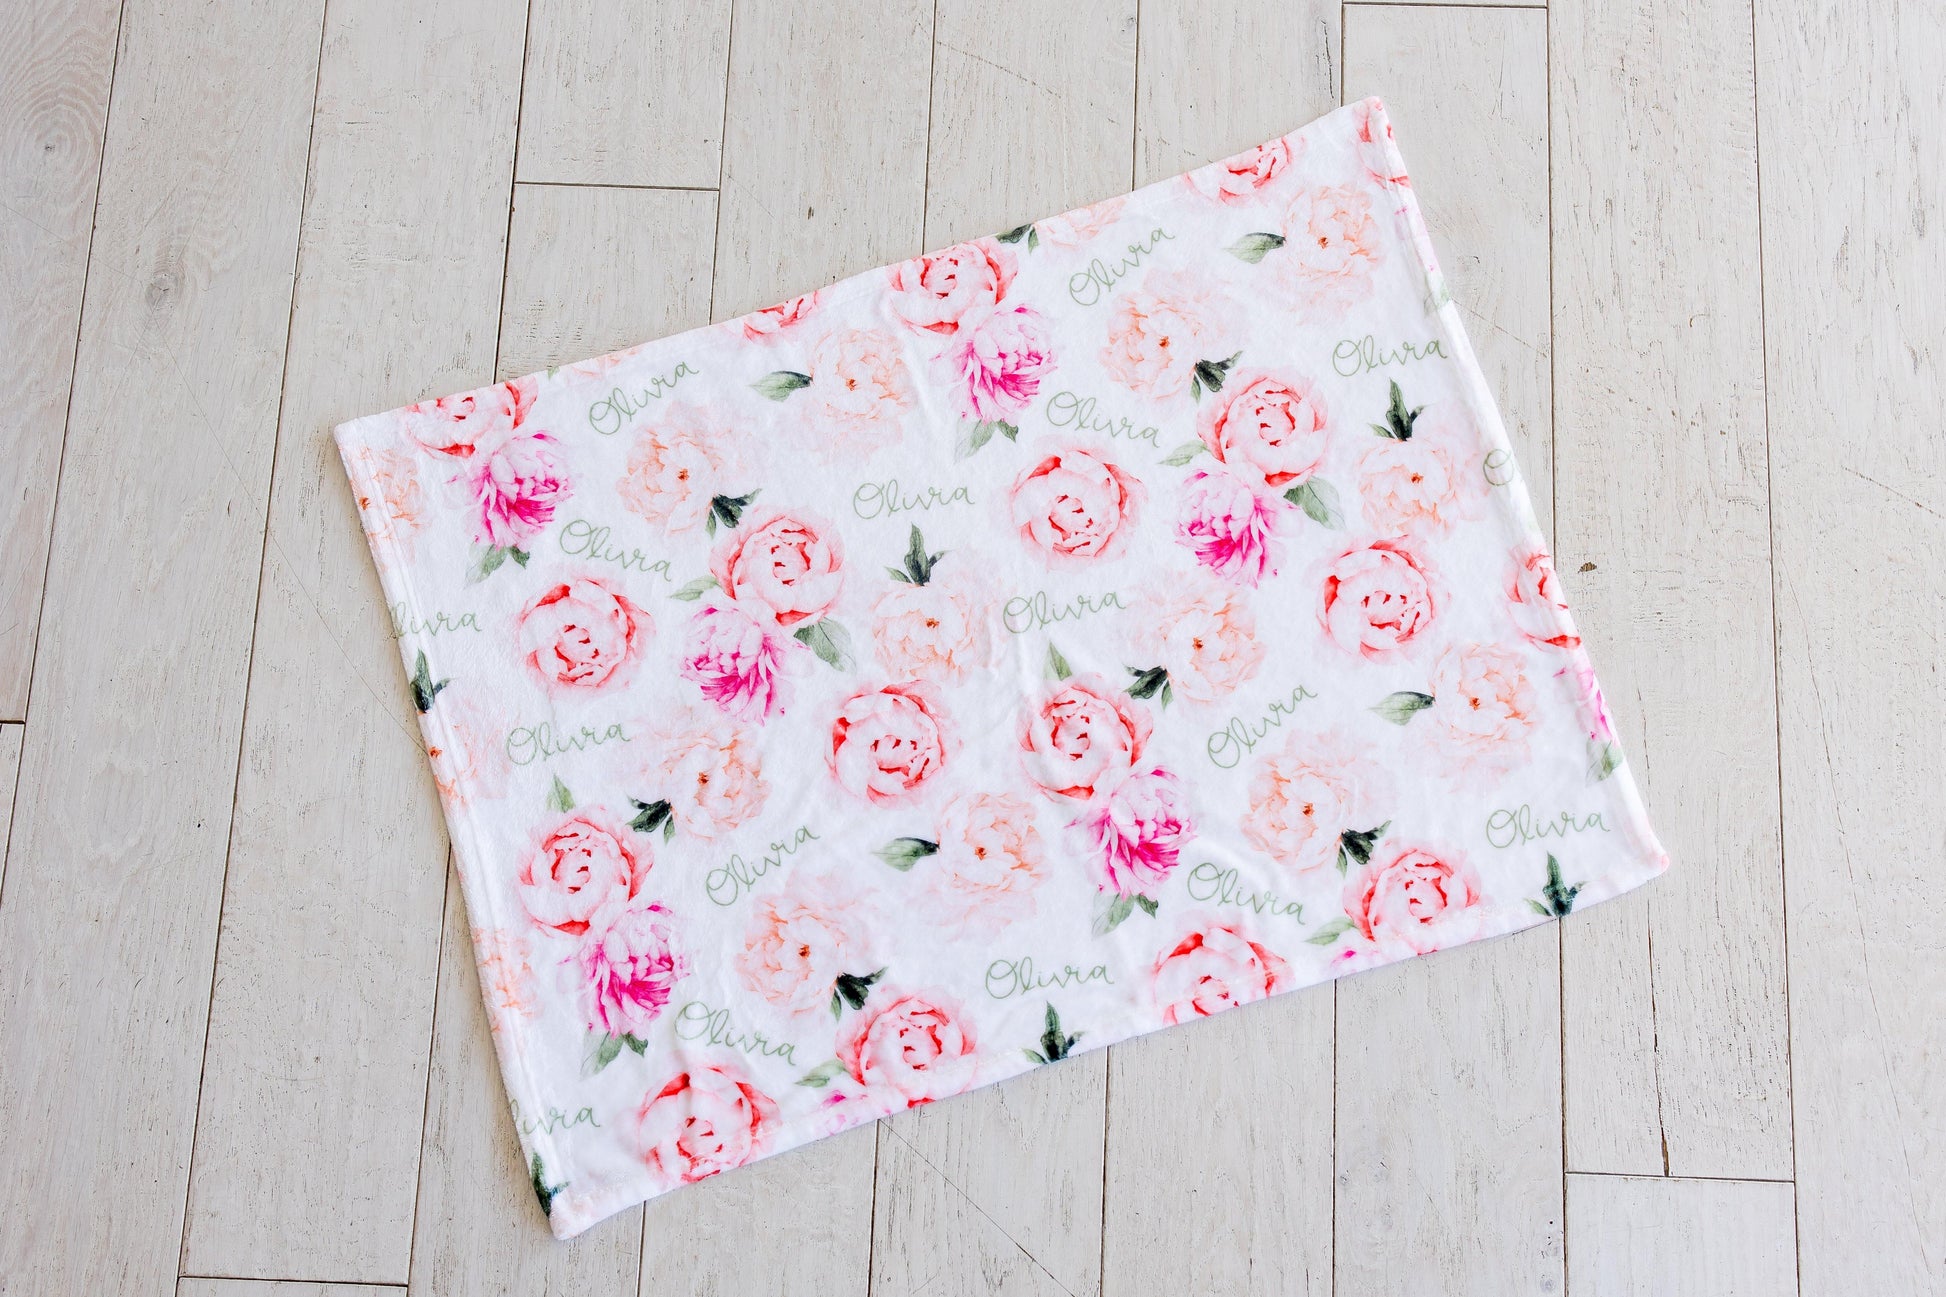 Plush Minky Personalized Blanket - Peach Peony Blooms - Sugar House Baby